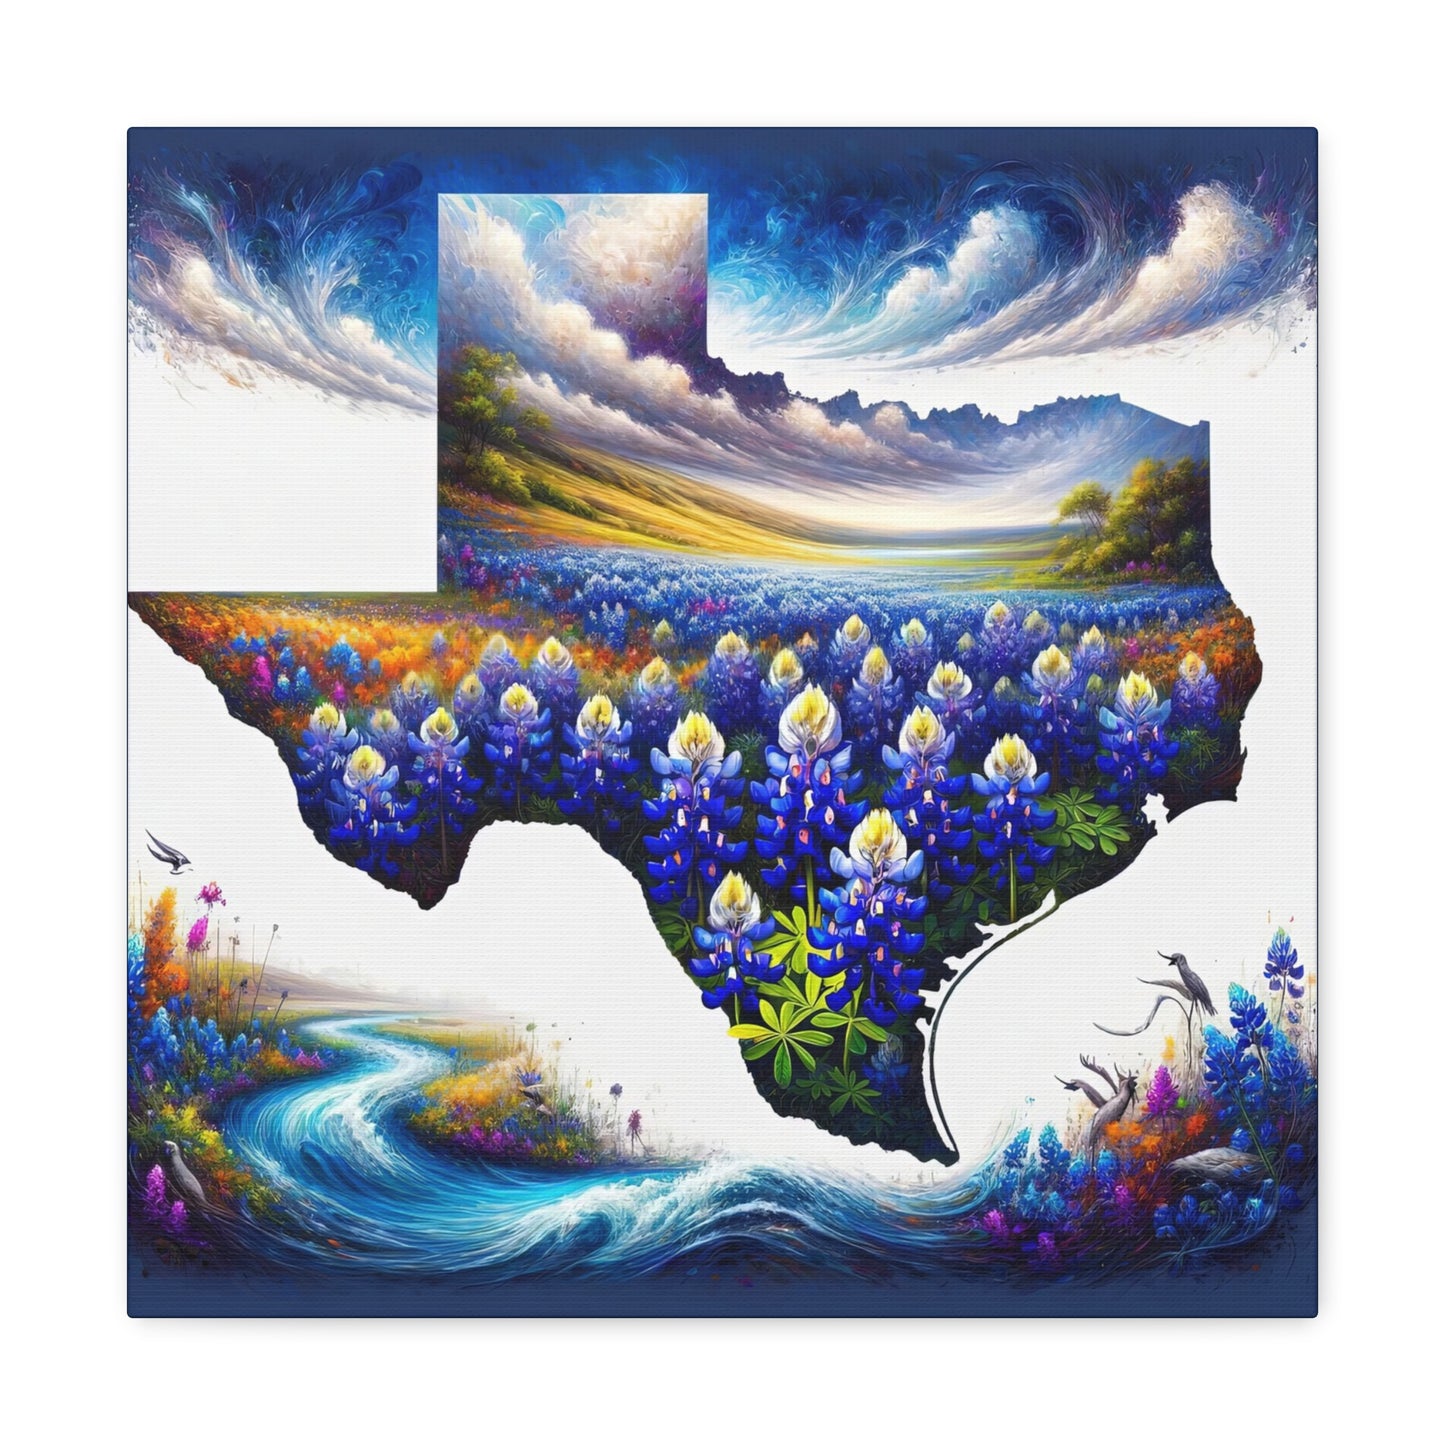 State of Texas - Bluebonnet